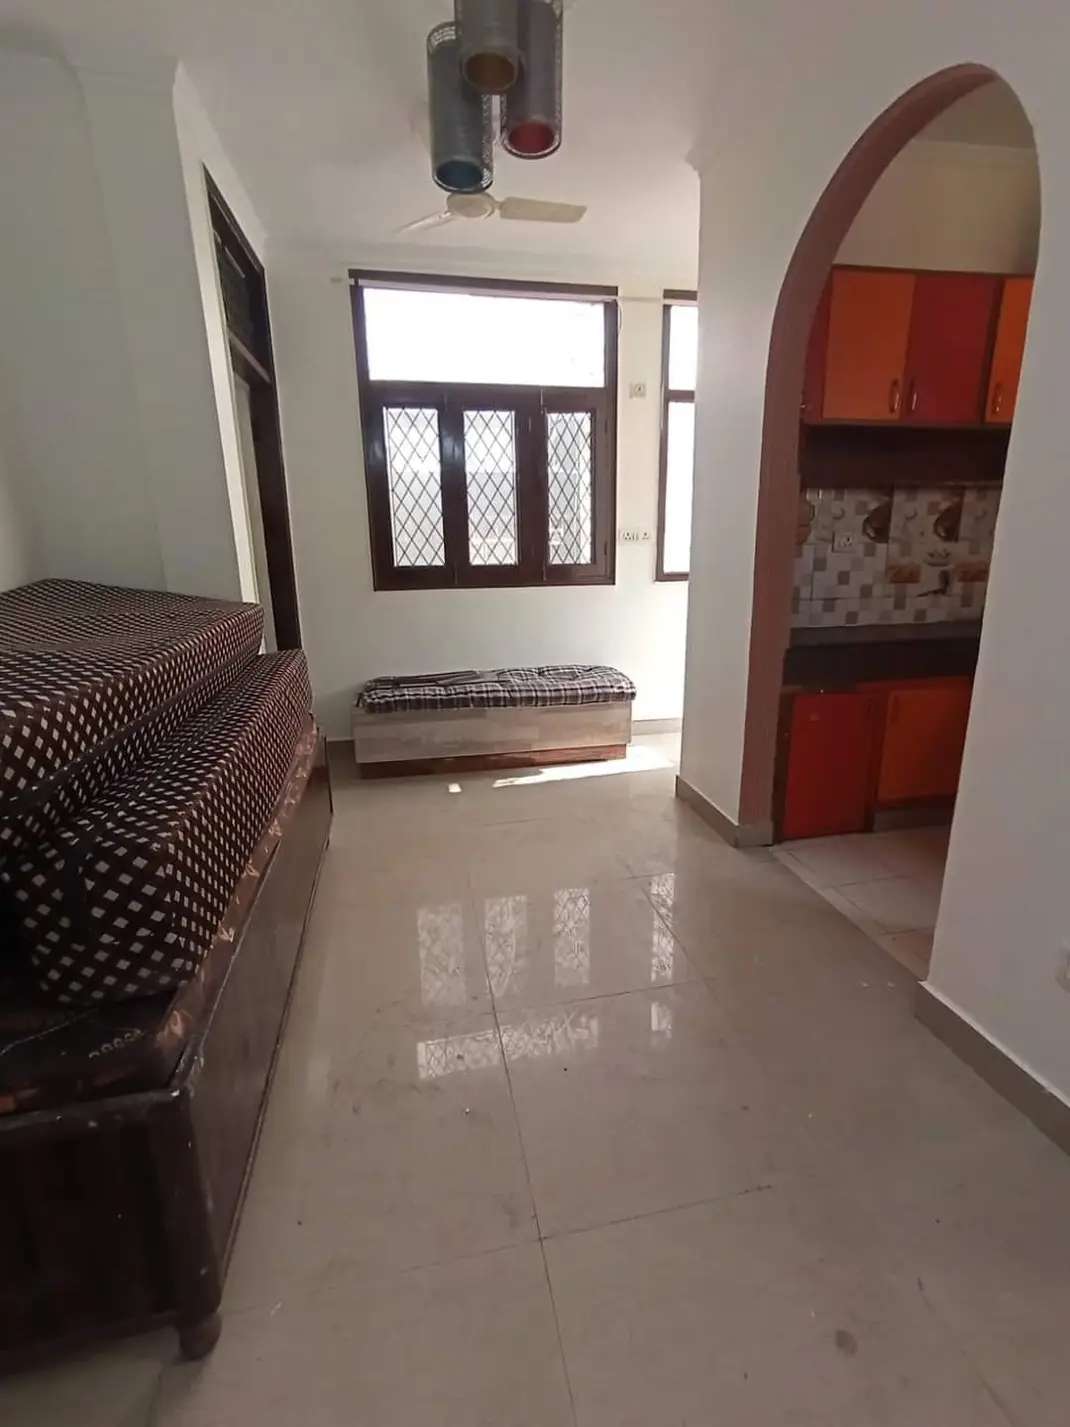 1 Bed/ 1 Bath Rent Apartment/ Flat, Furnished for rent @Bhopal